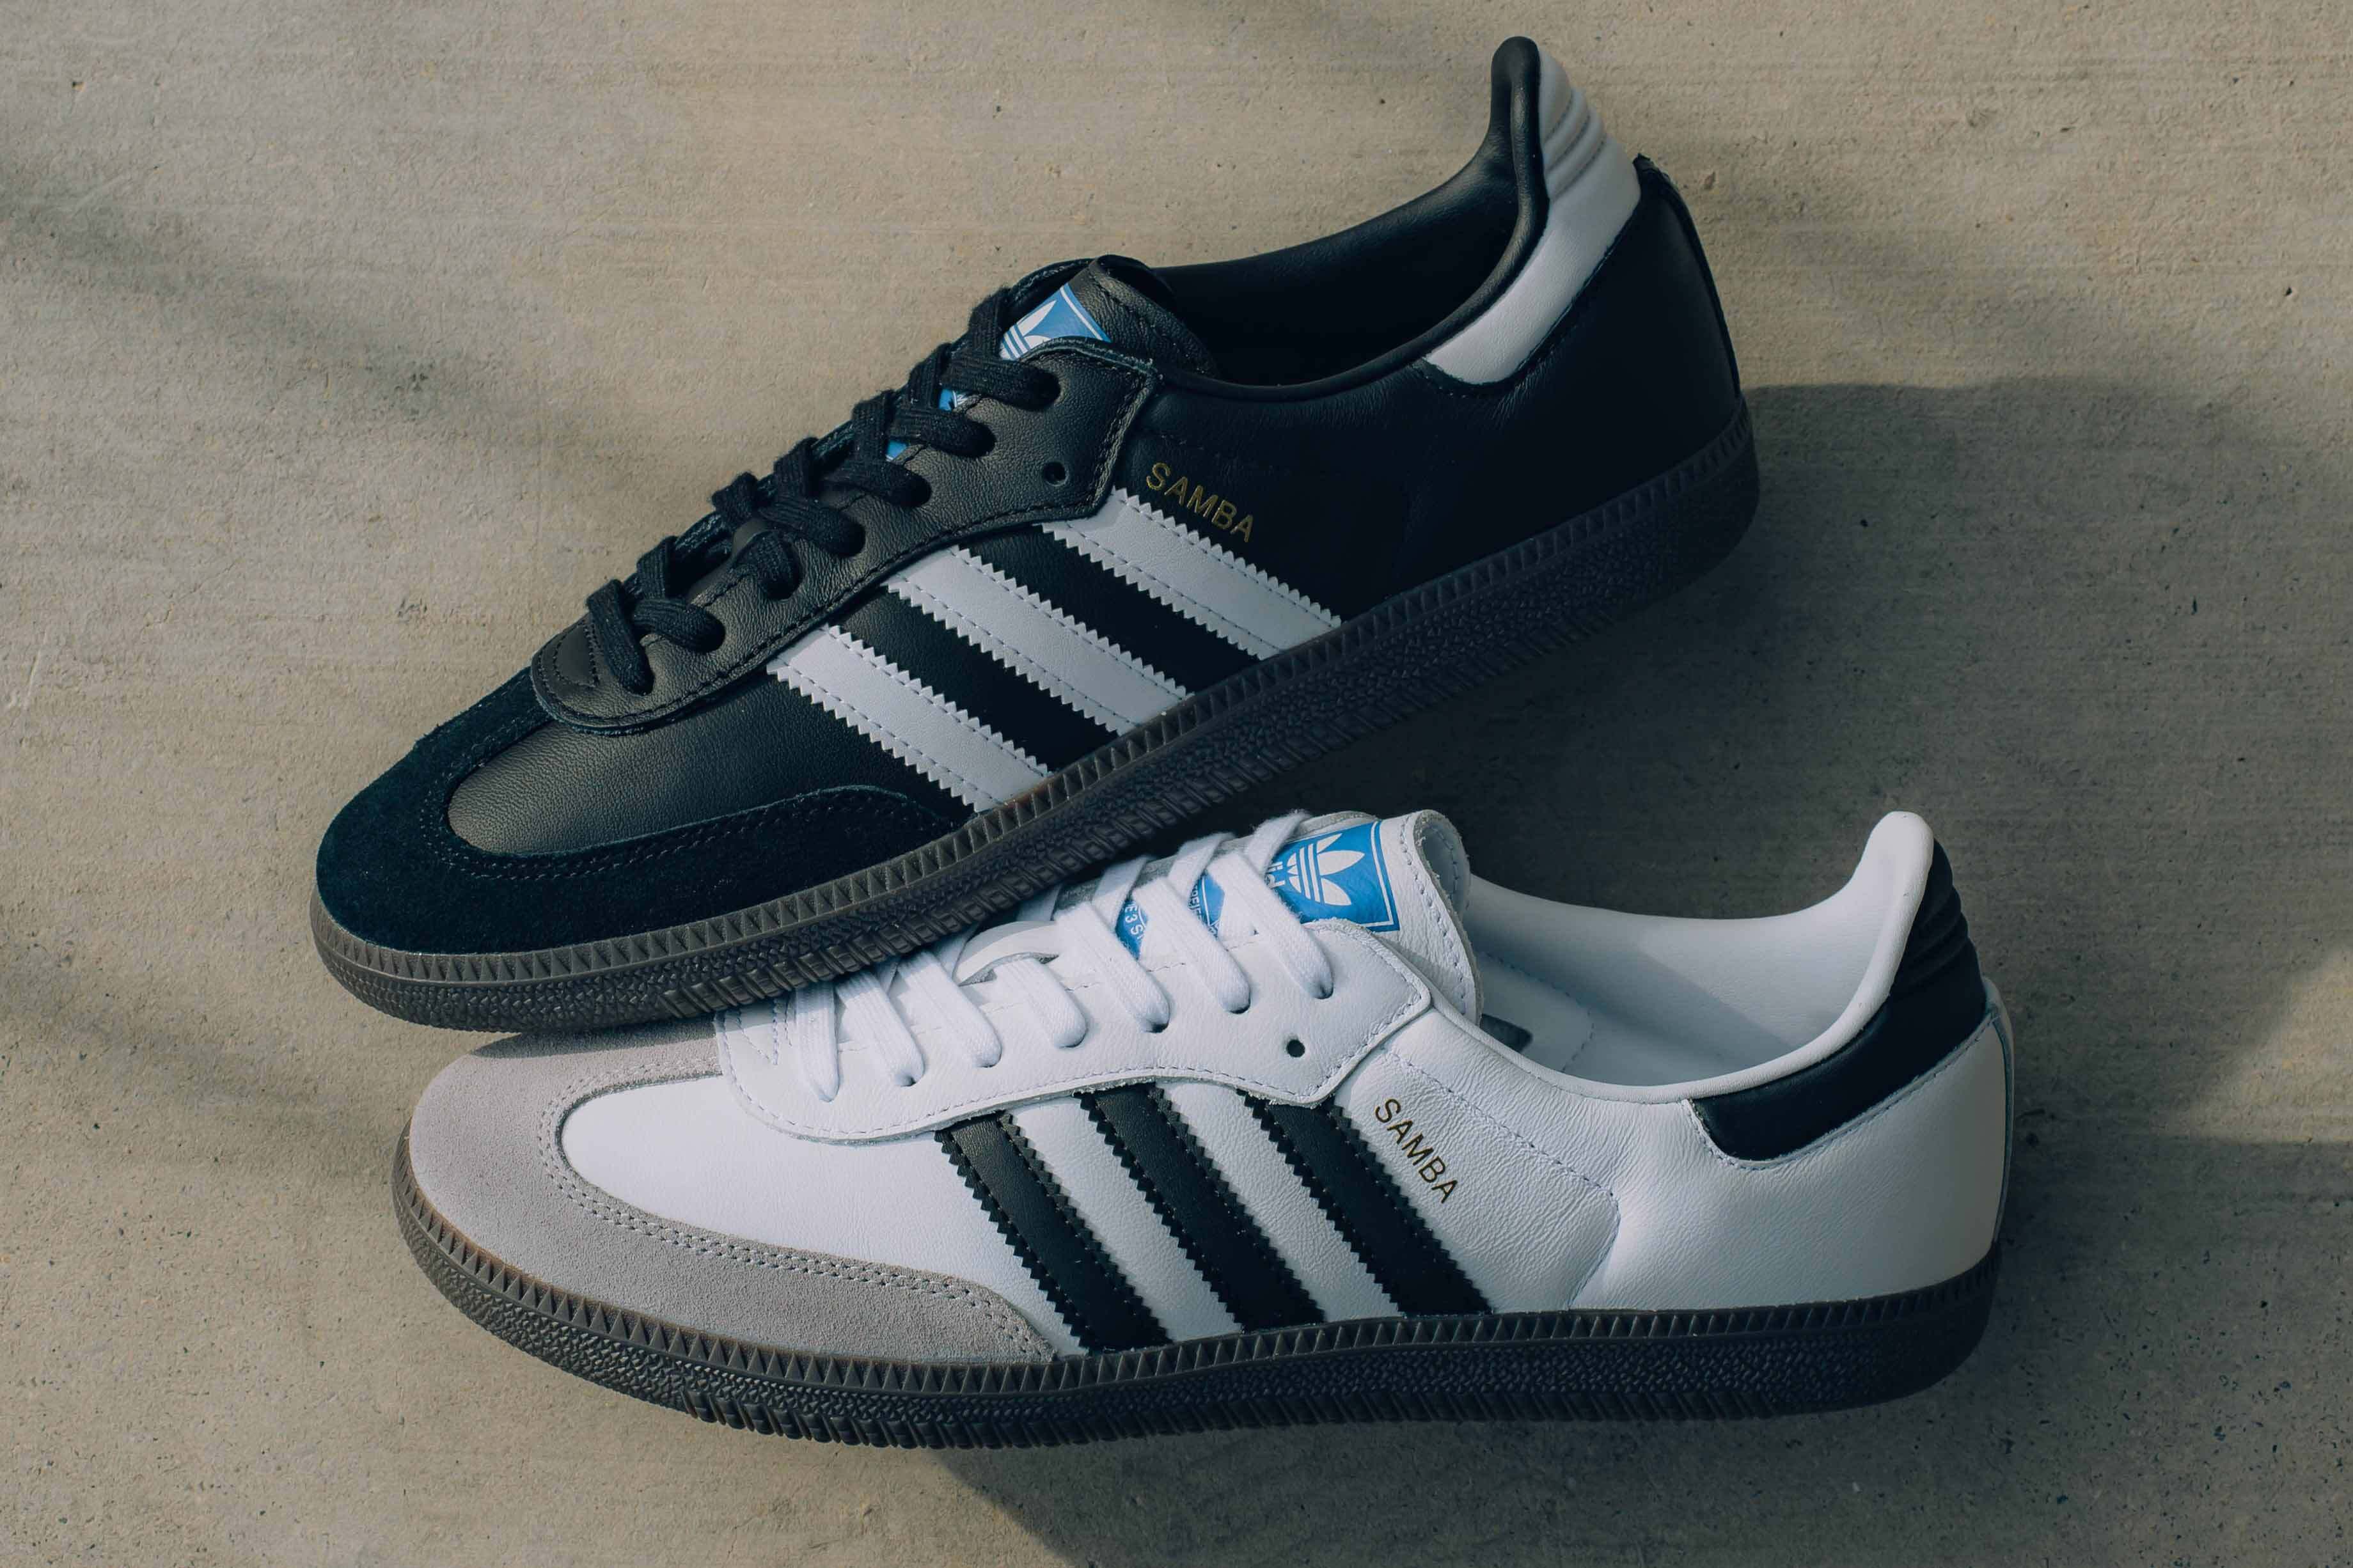 Adidas Originals Samba OG: Available In-Store Now – Feature